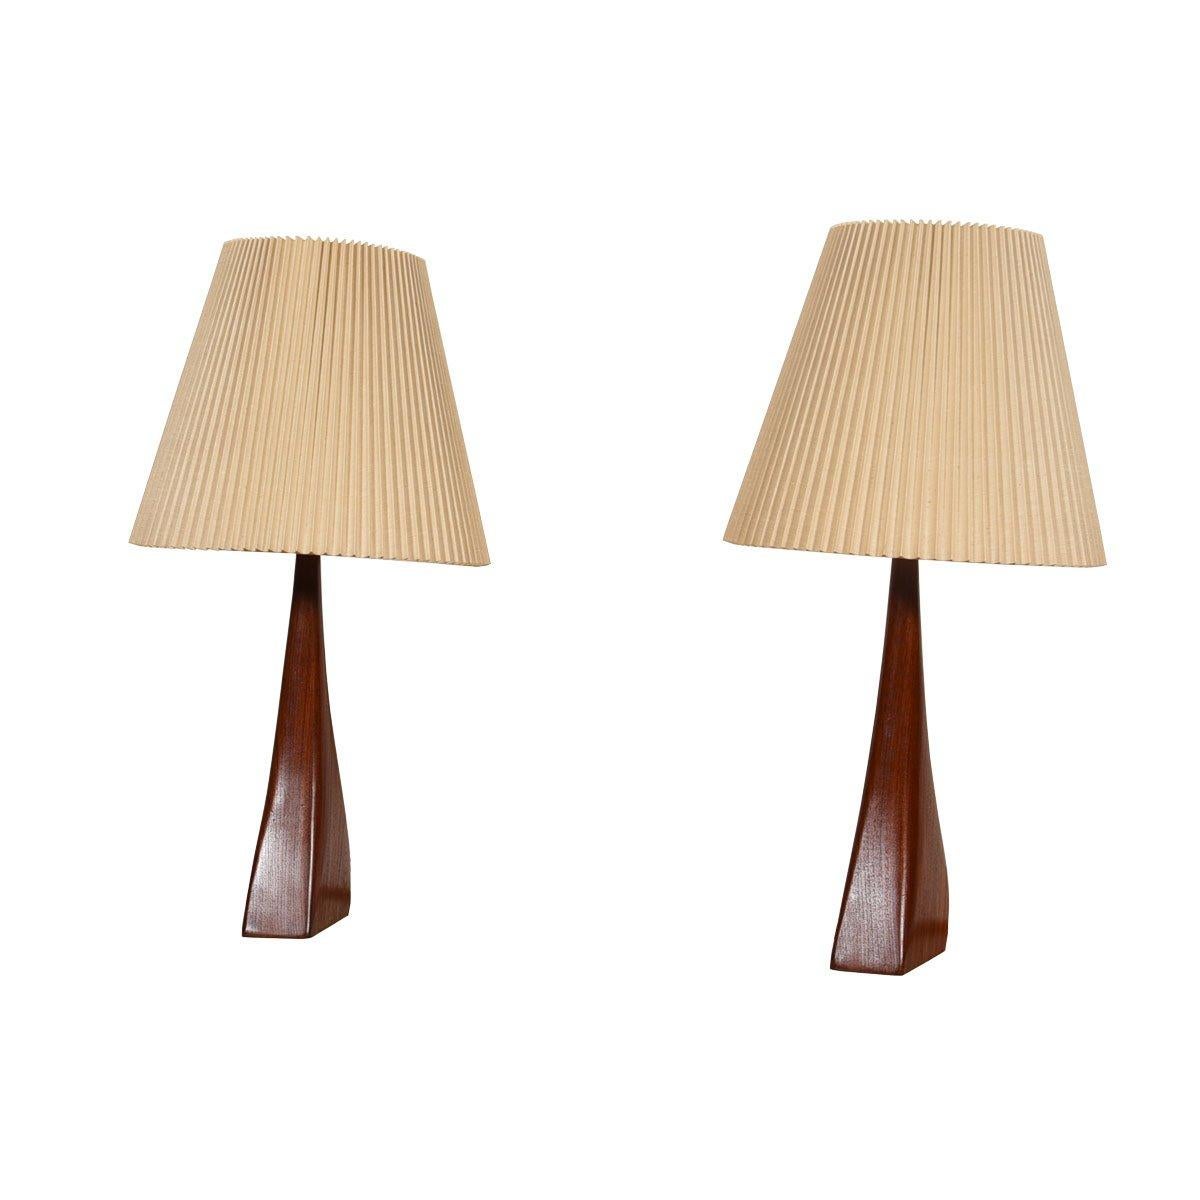 20th Century Pair of Teak Lamps by Johannes Aasbjerg, Denmark For Sale